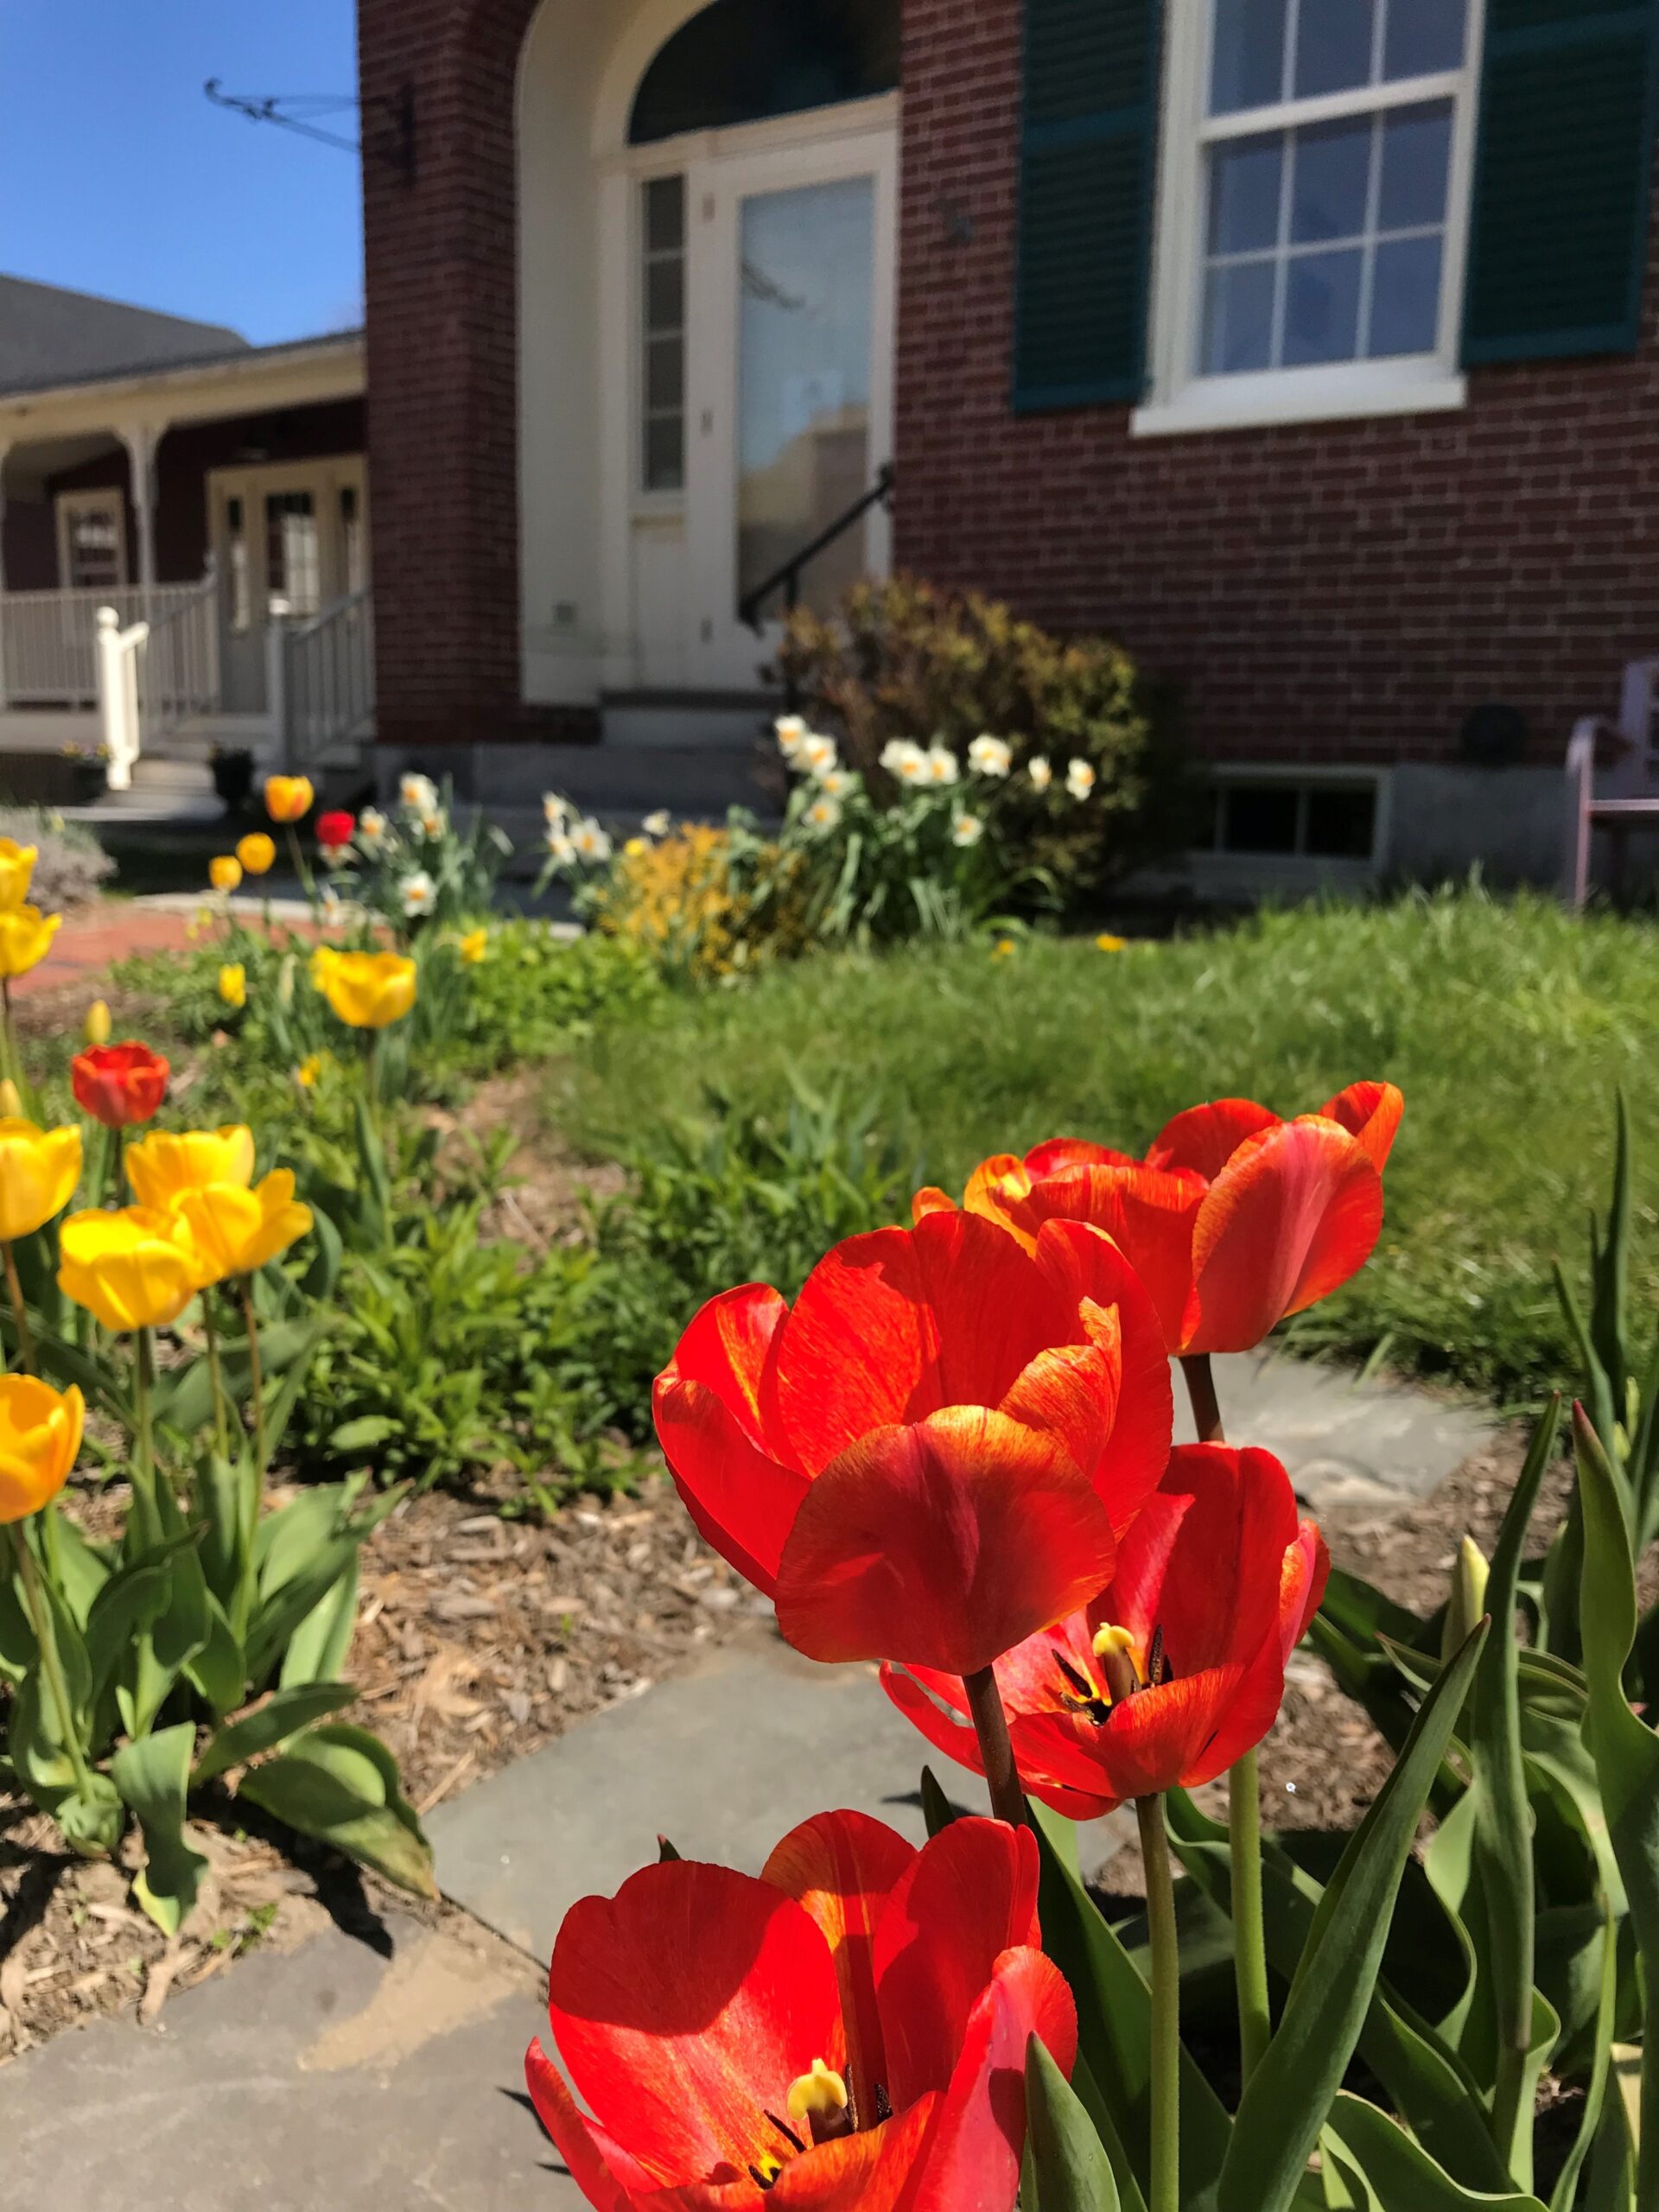 A red tulip in the foreground of a stone path lined with tulips leading to the entrance of a historic brick building.